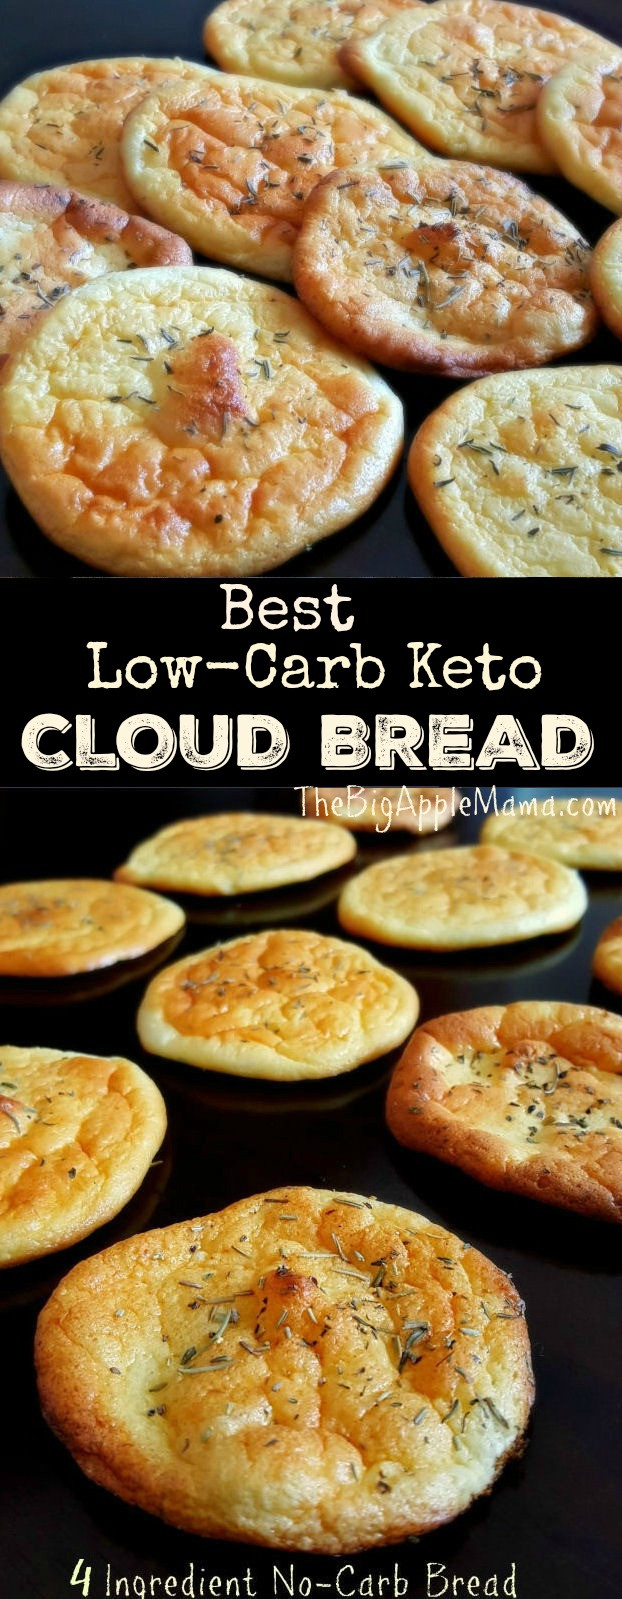 Keto Cloud Bread Low Carb
 The Best No Carb Cloud Bread with only 4 Ingre nts